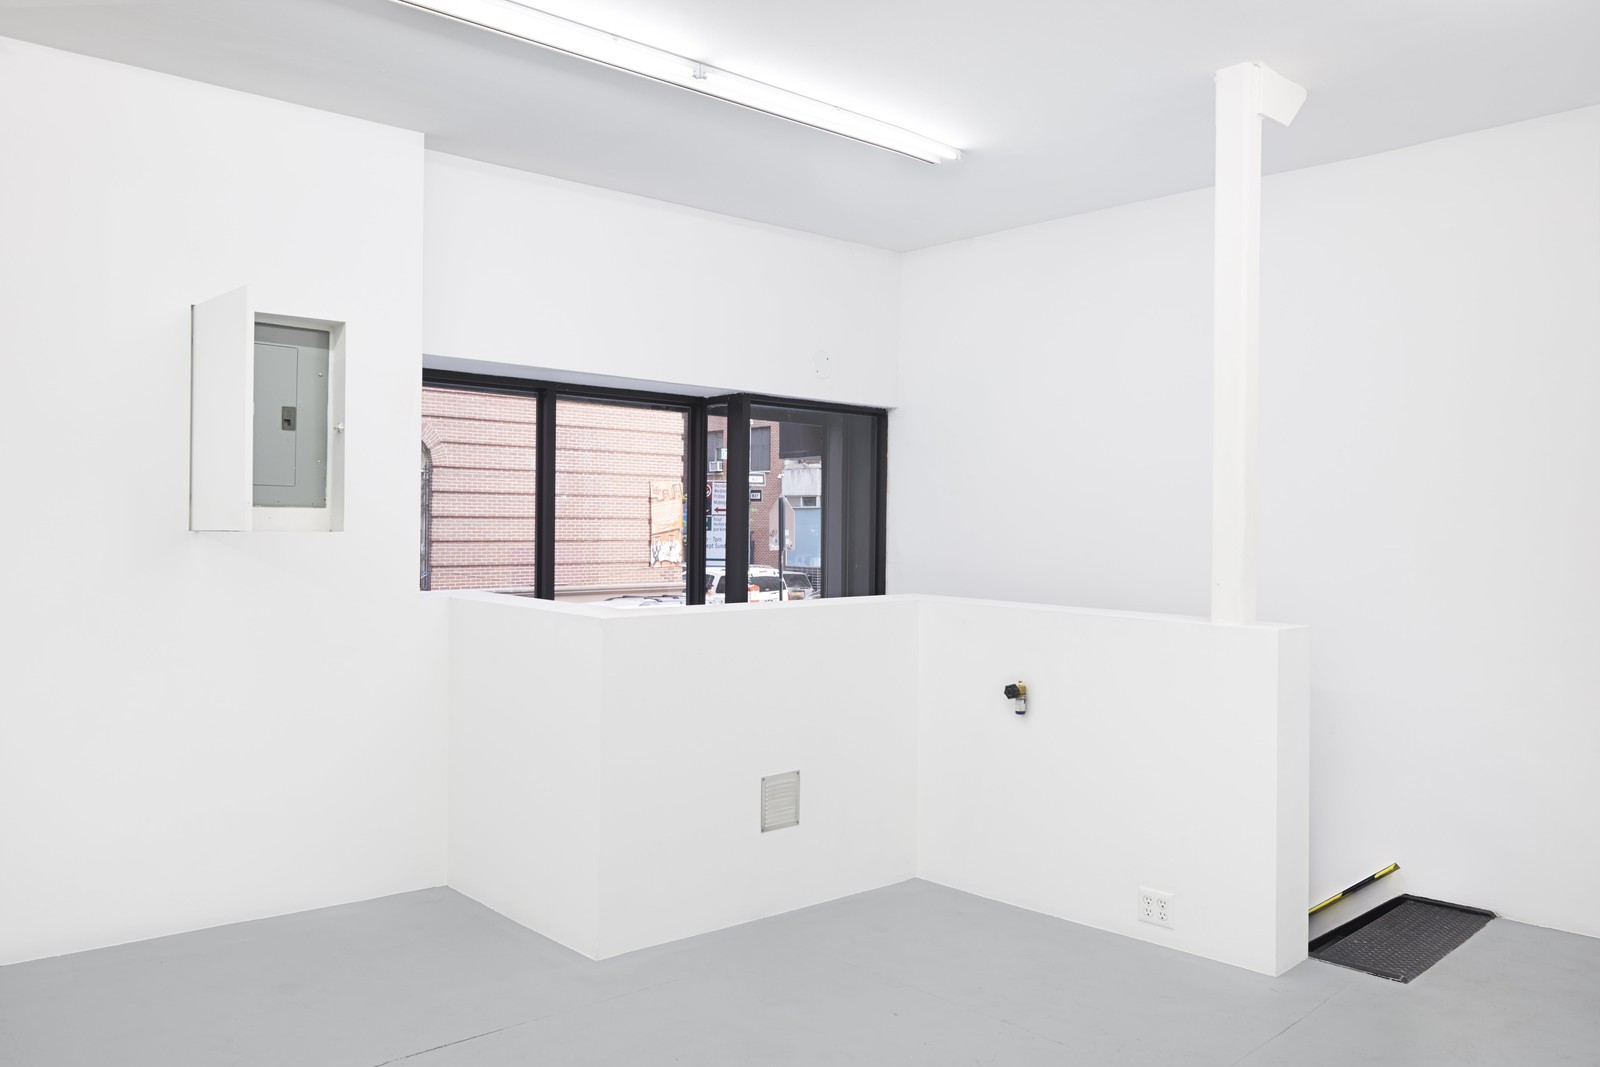 Installation view, Calculus of Negligence, Room East, New York, 2015